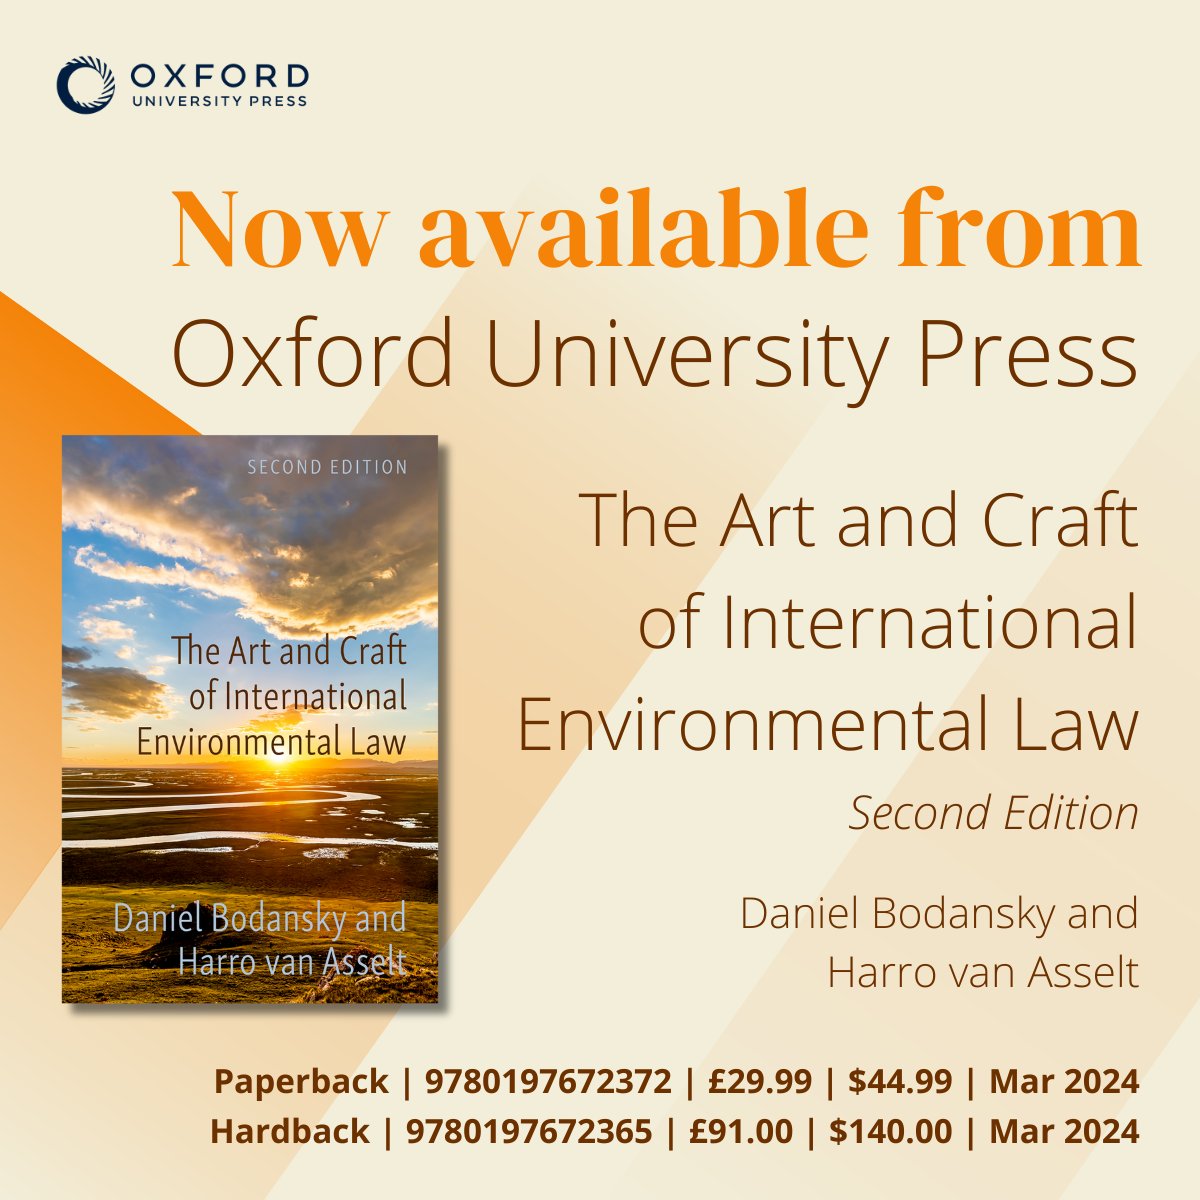 'The Art and Craft of International Environmental Law' by @harrovanasselt and Daniel Bodansky is a sophisticated yet highly readable introduction to the topic. Now fully updated for its second edition. Learn more 📙 oxford.ly/3v28LCc